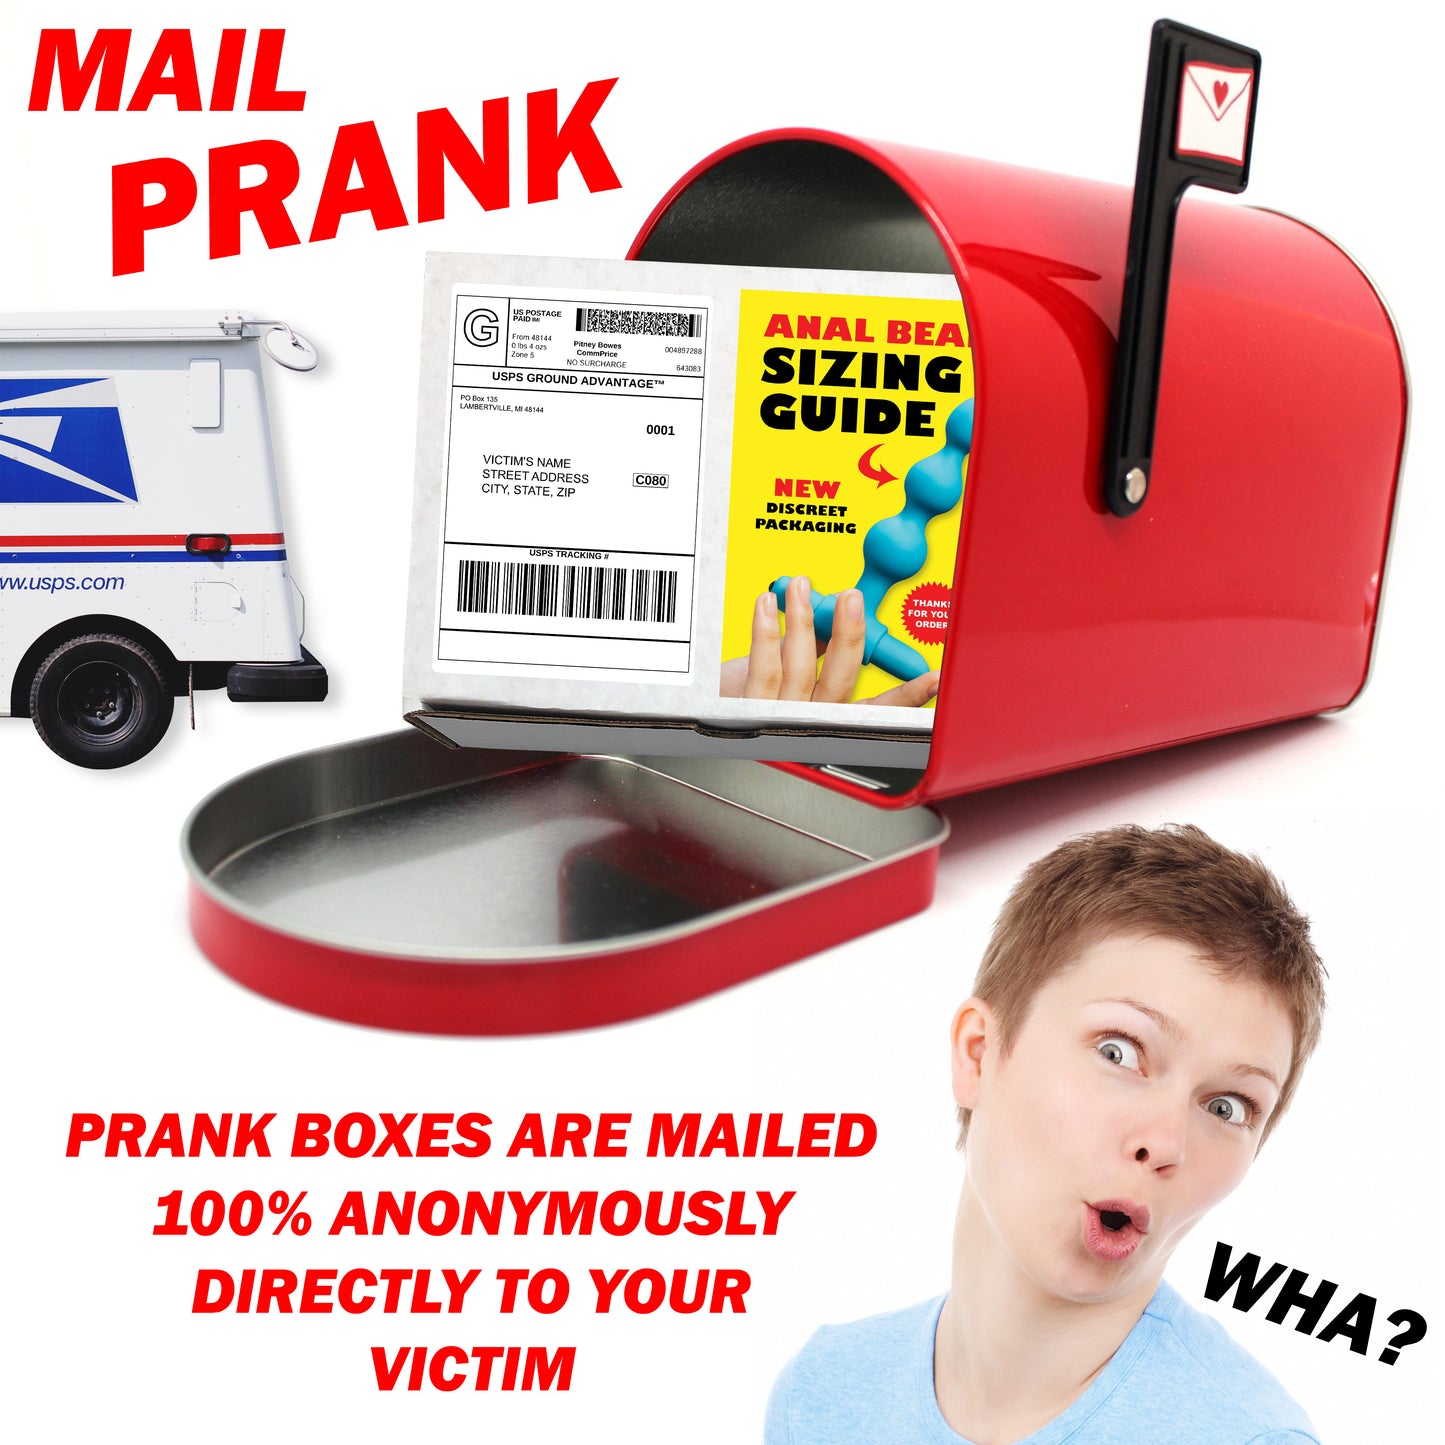 Anal Beads Sizing Guide Prank Mail